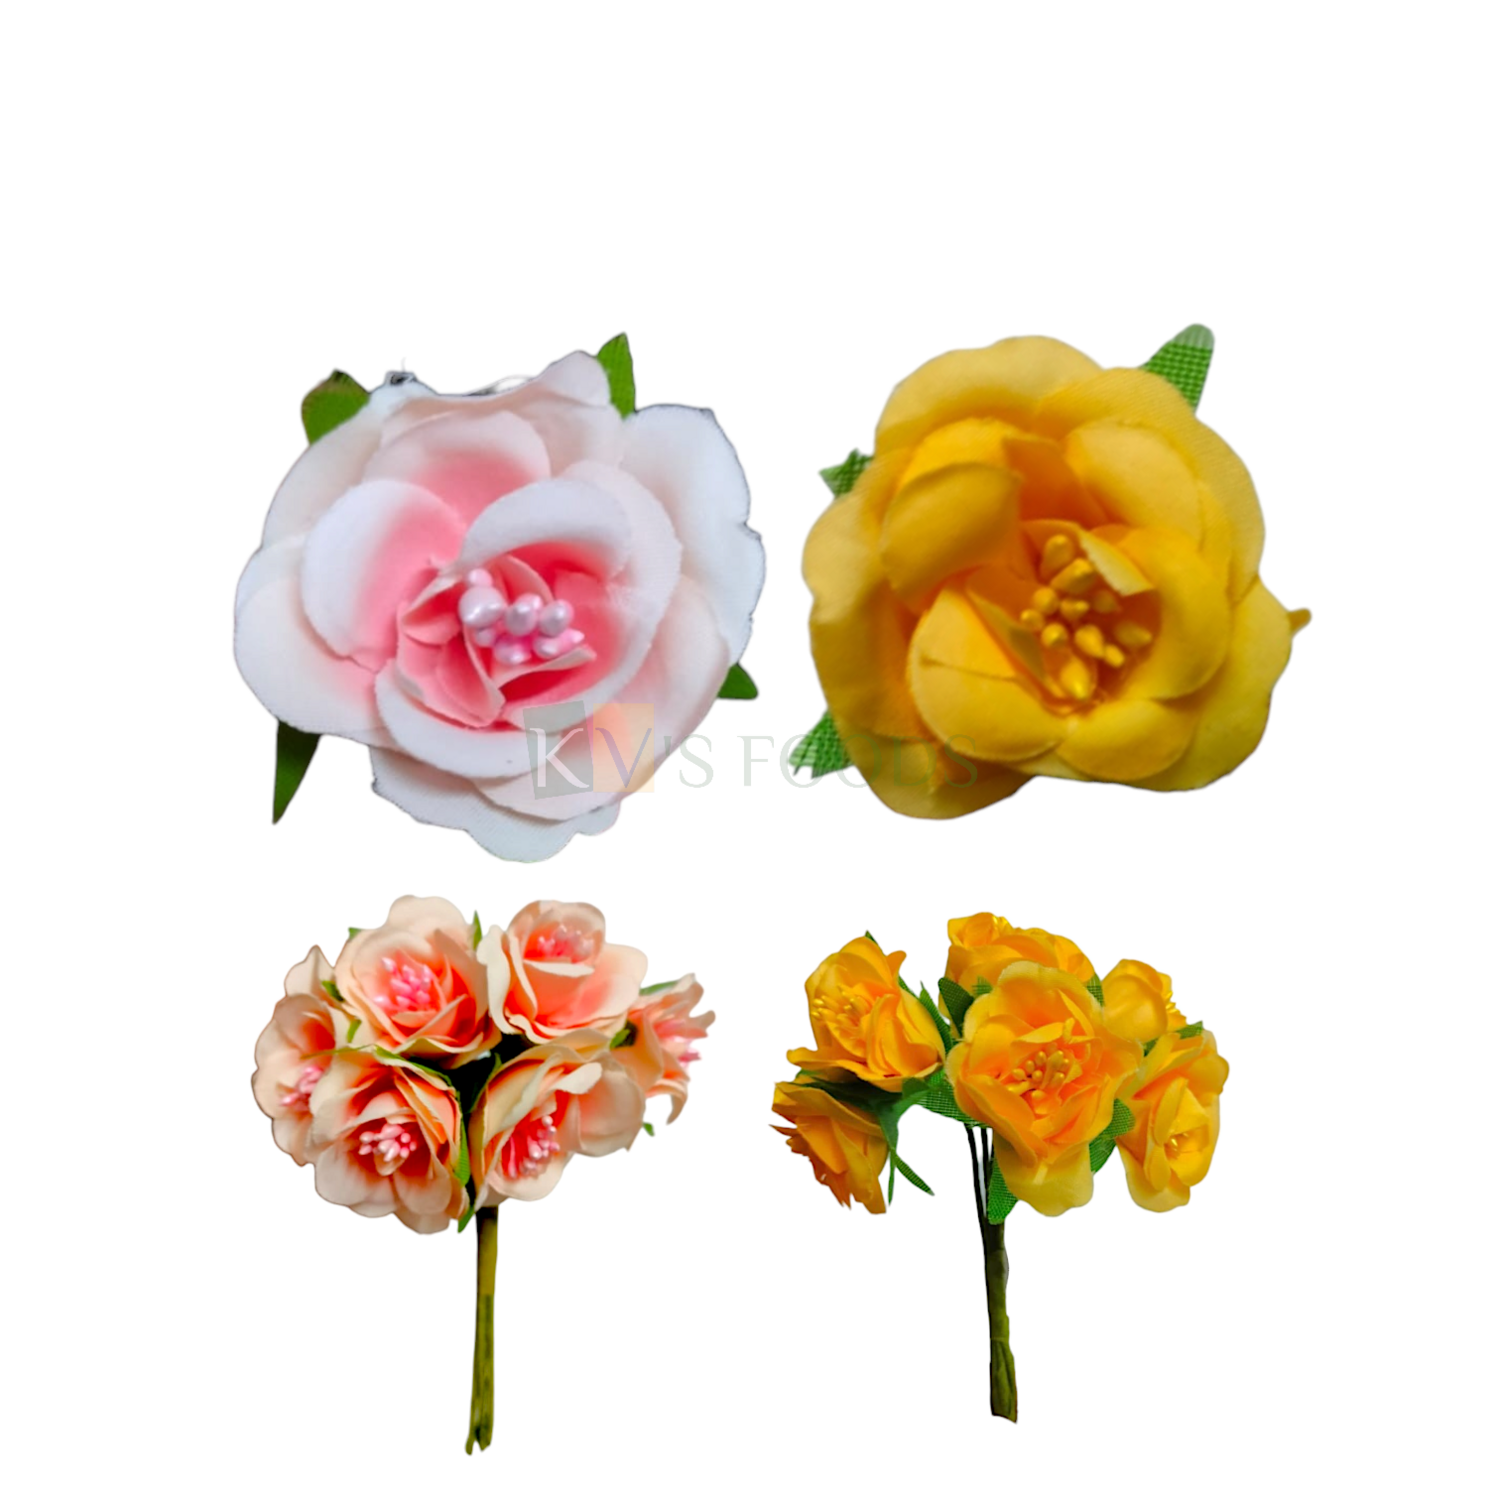 6 PCS Small Non-Edible Rose Peony Flowers Length 1.8 Inch in Different Colour for Birthday Wedding Anniversary Engagement Christmas Cake Cupcake Function DIY Craft Home Hair Accessory Decorations